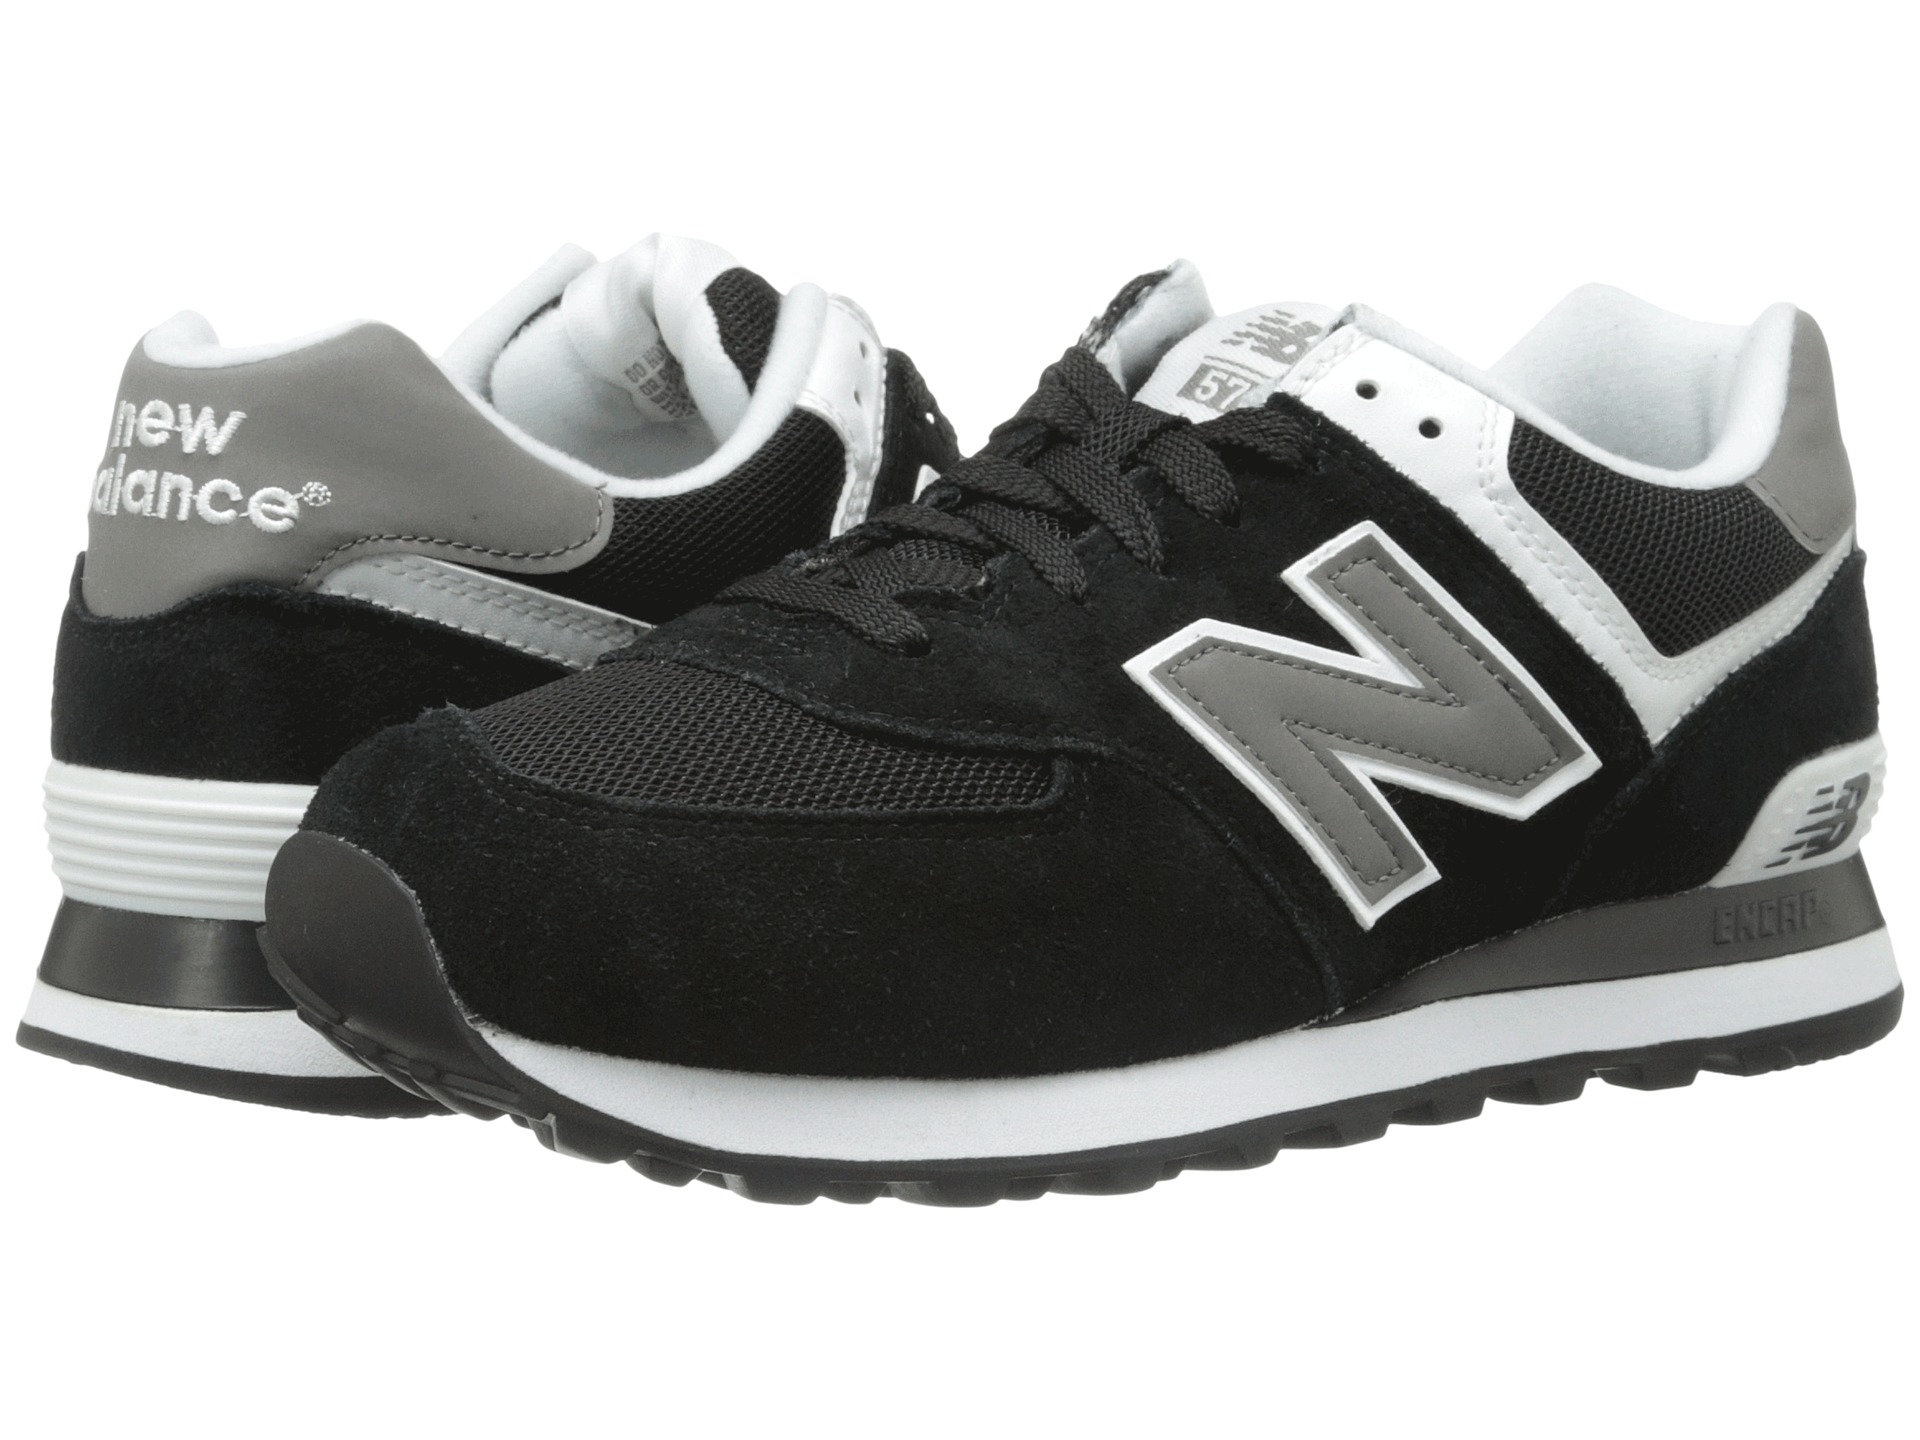 new balance 524 classic Online Shopping mall | Find the best ...